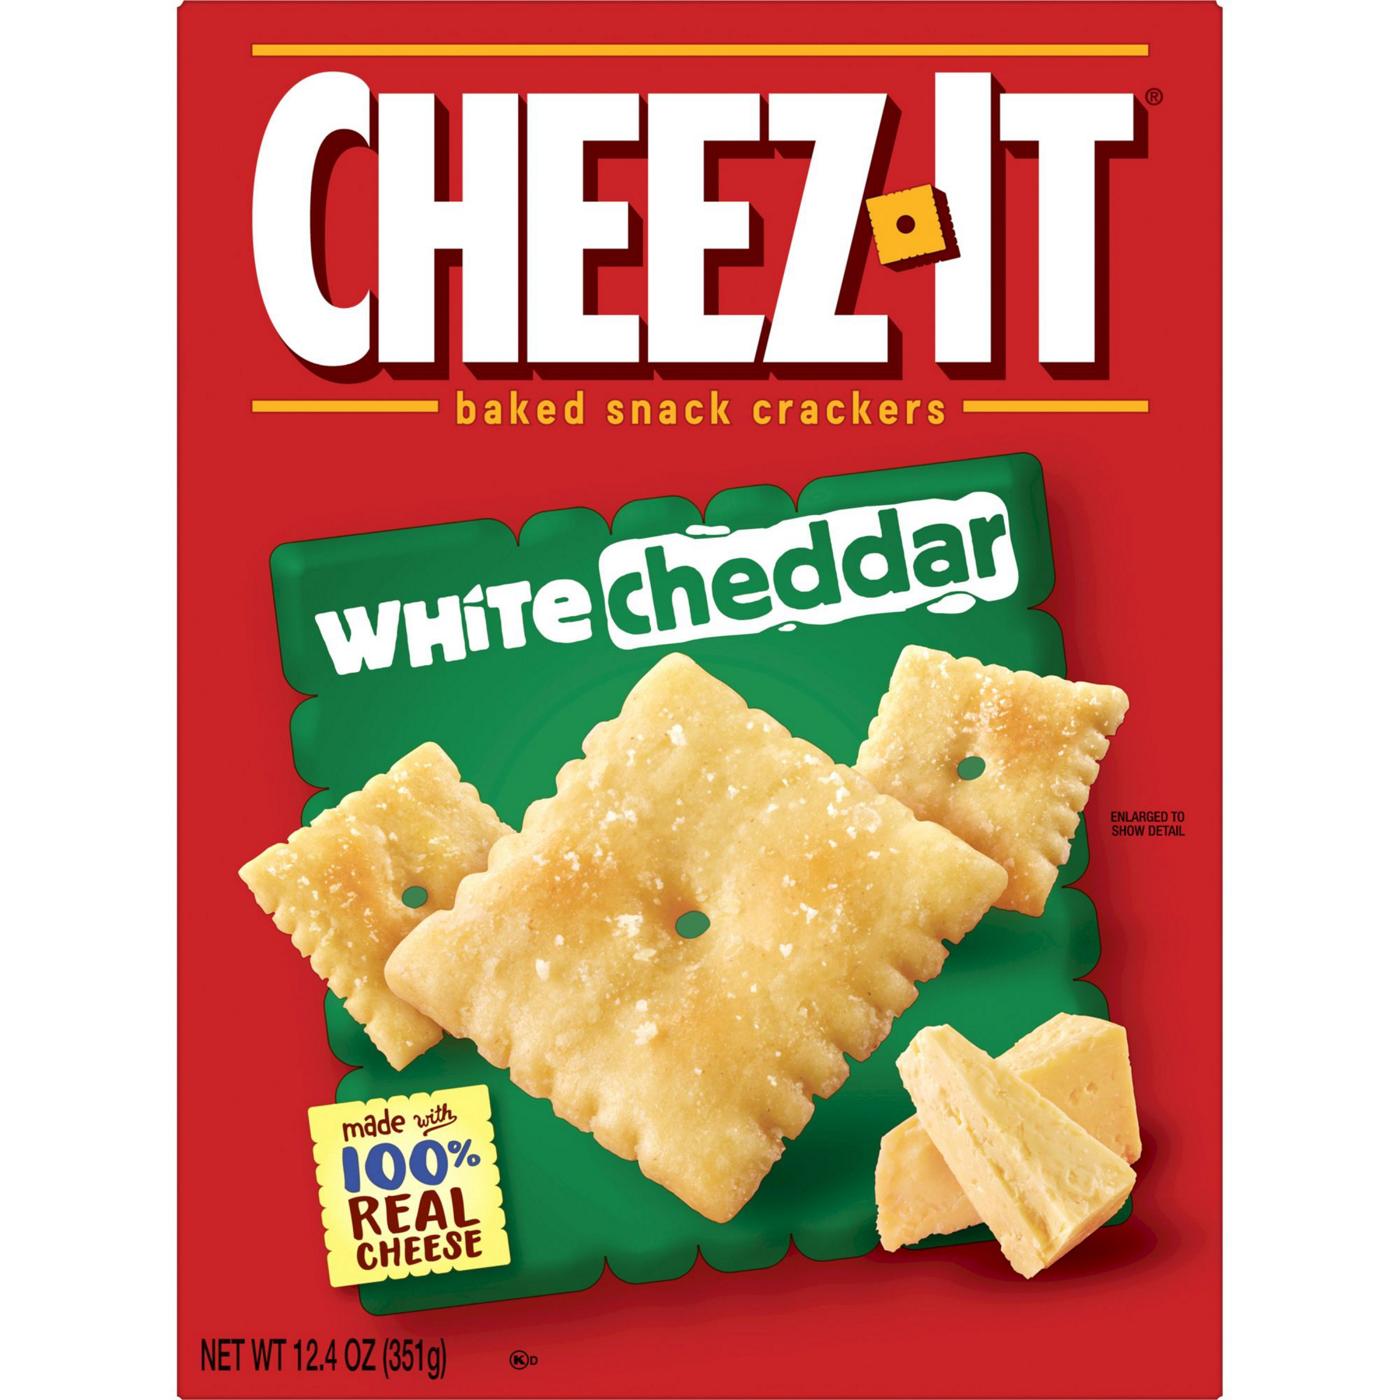 Cheez-It White Cheddar Cheese Crackers; image 1 of 4